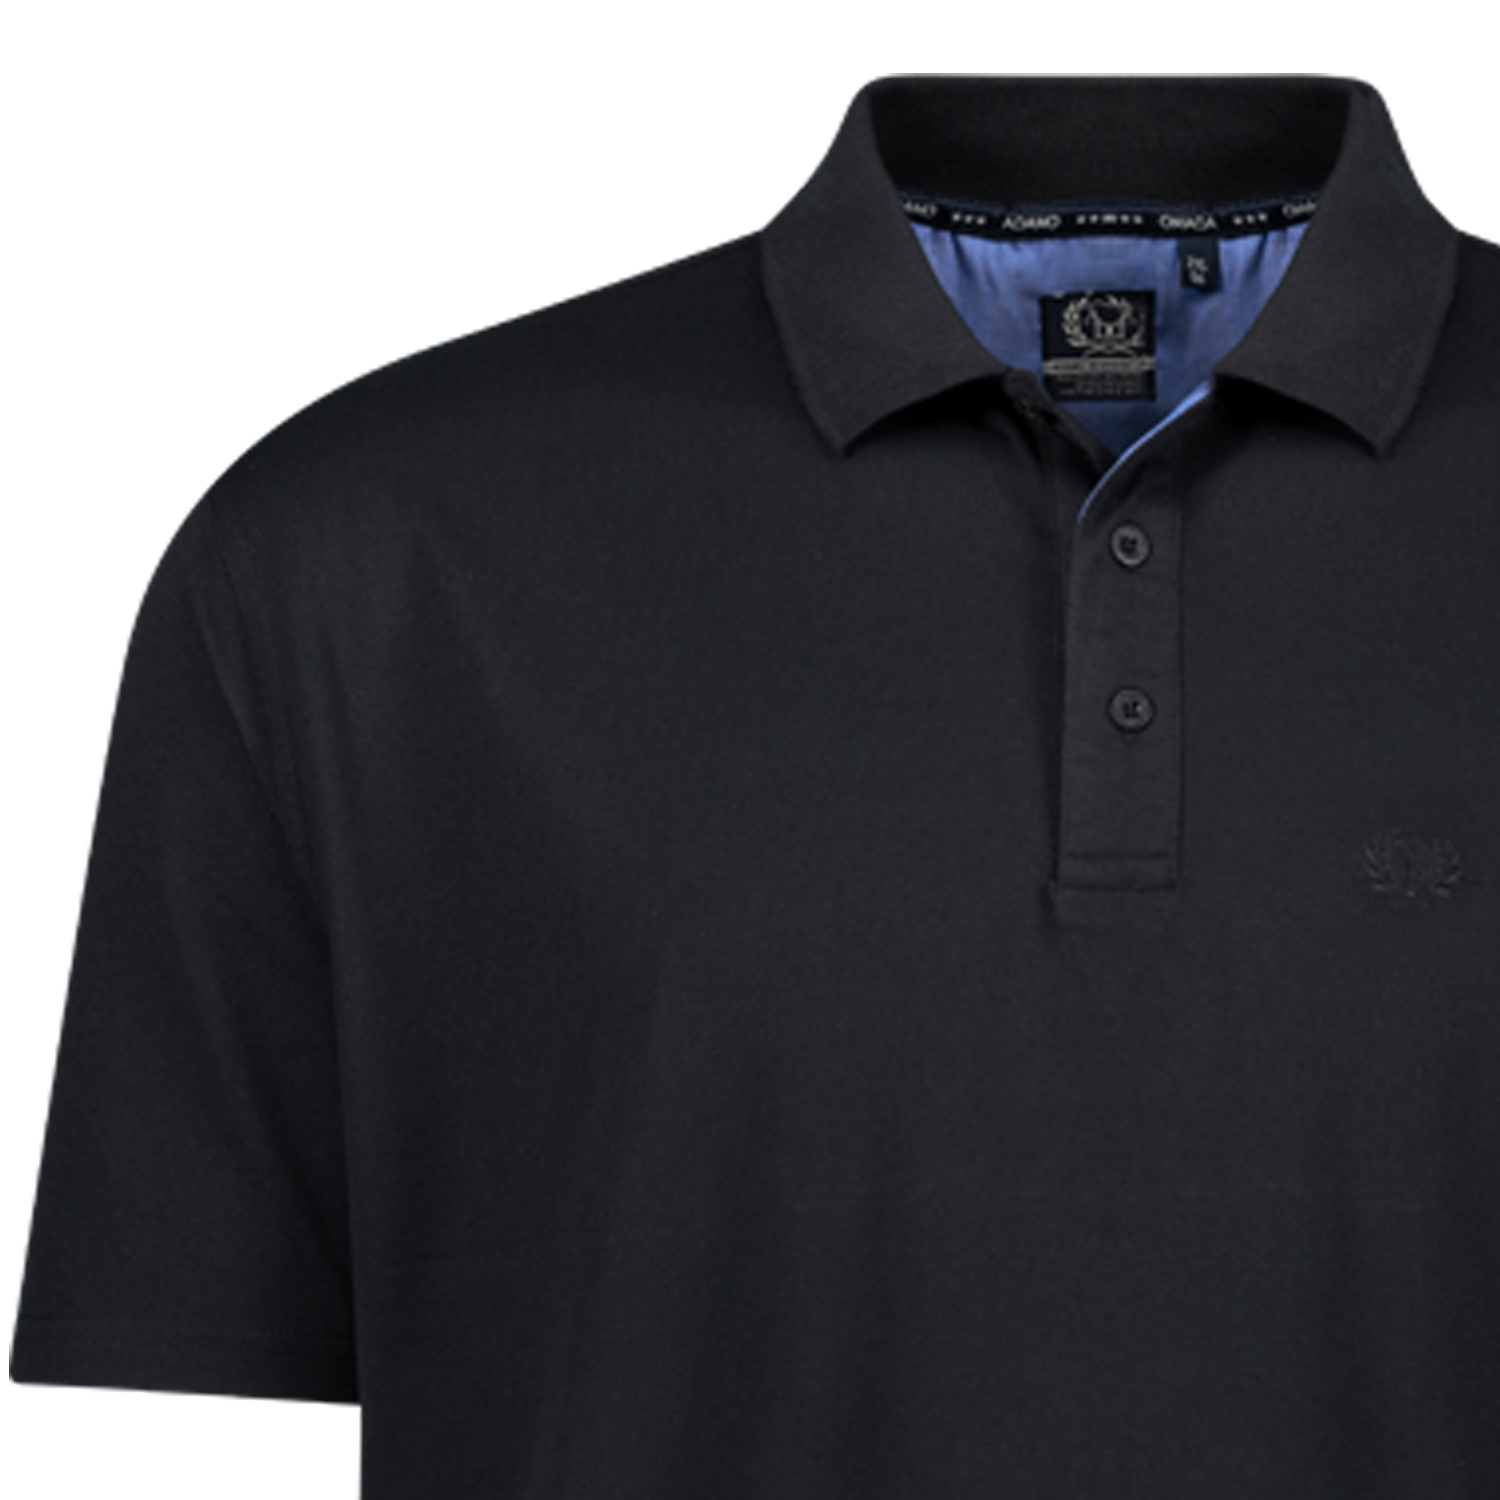 Black short sleeve polo shirt PICCO by ADAMO for men in large sizes up to 12XL